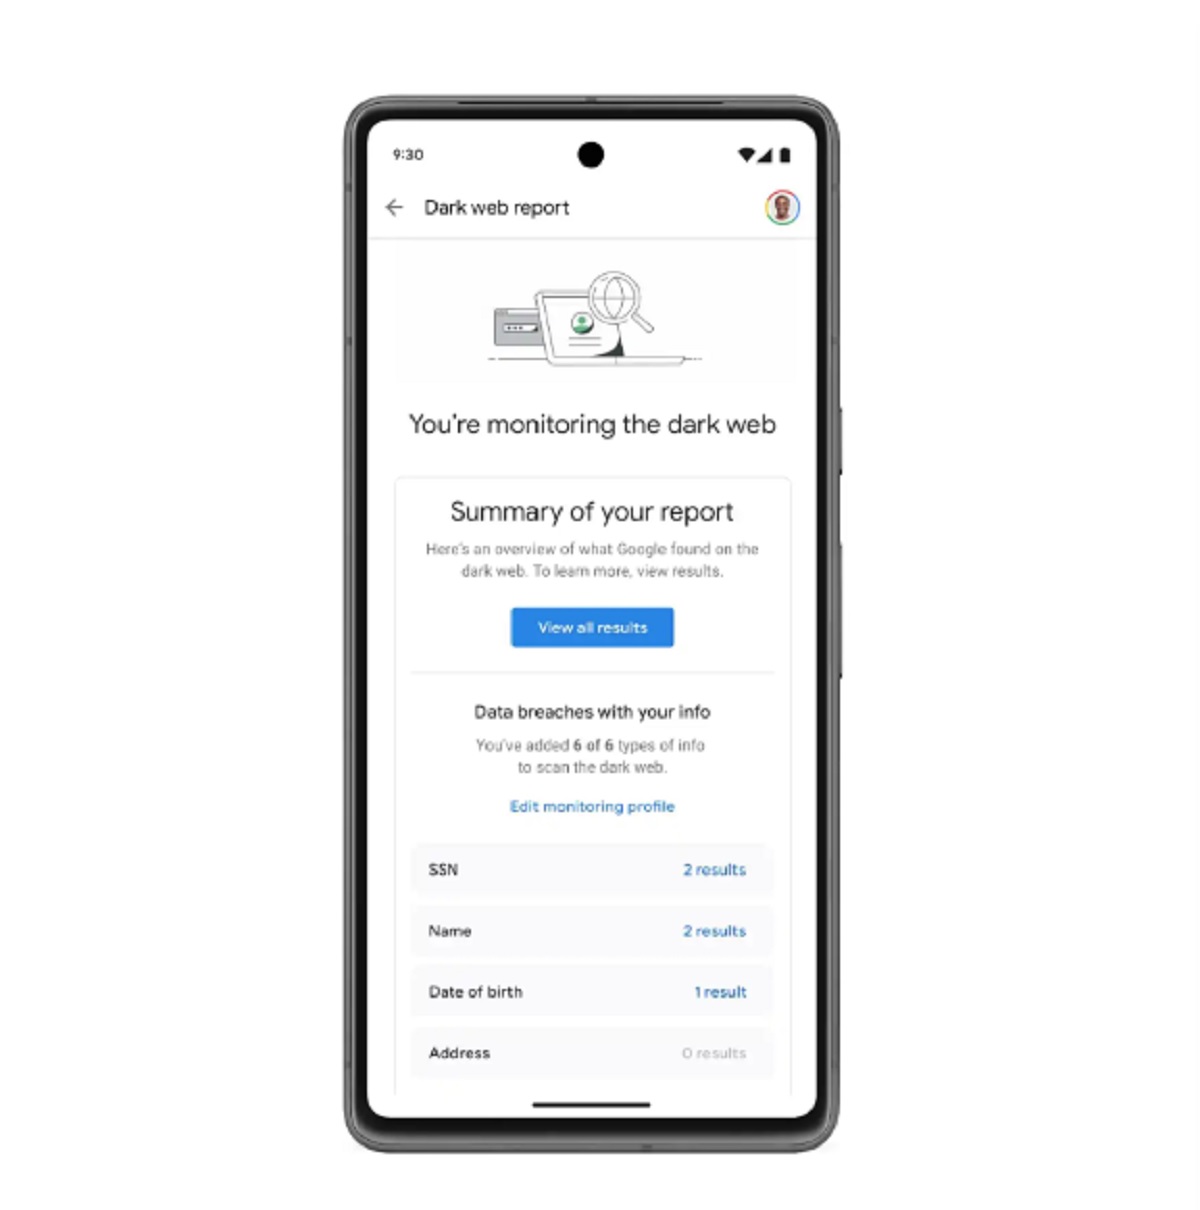 Free VPN will be available in all Google One plans soon